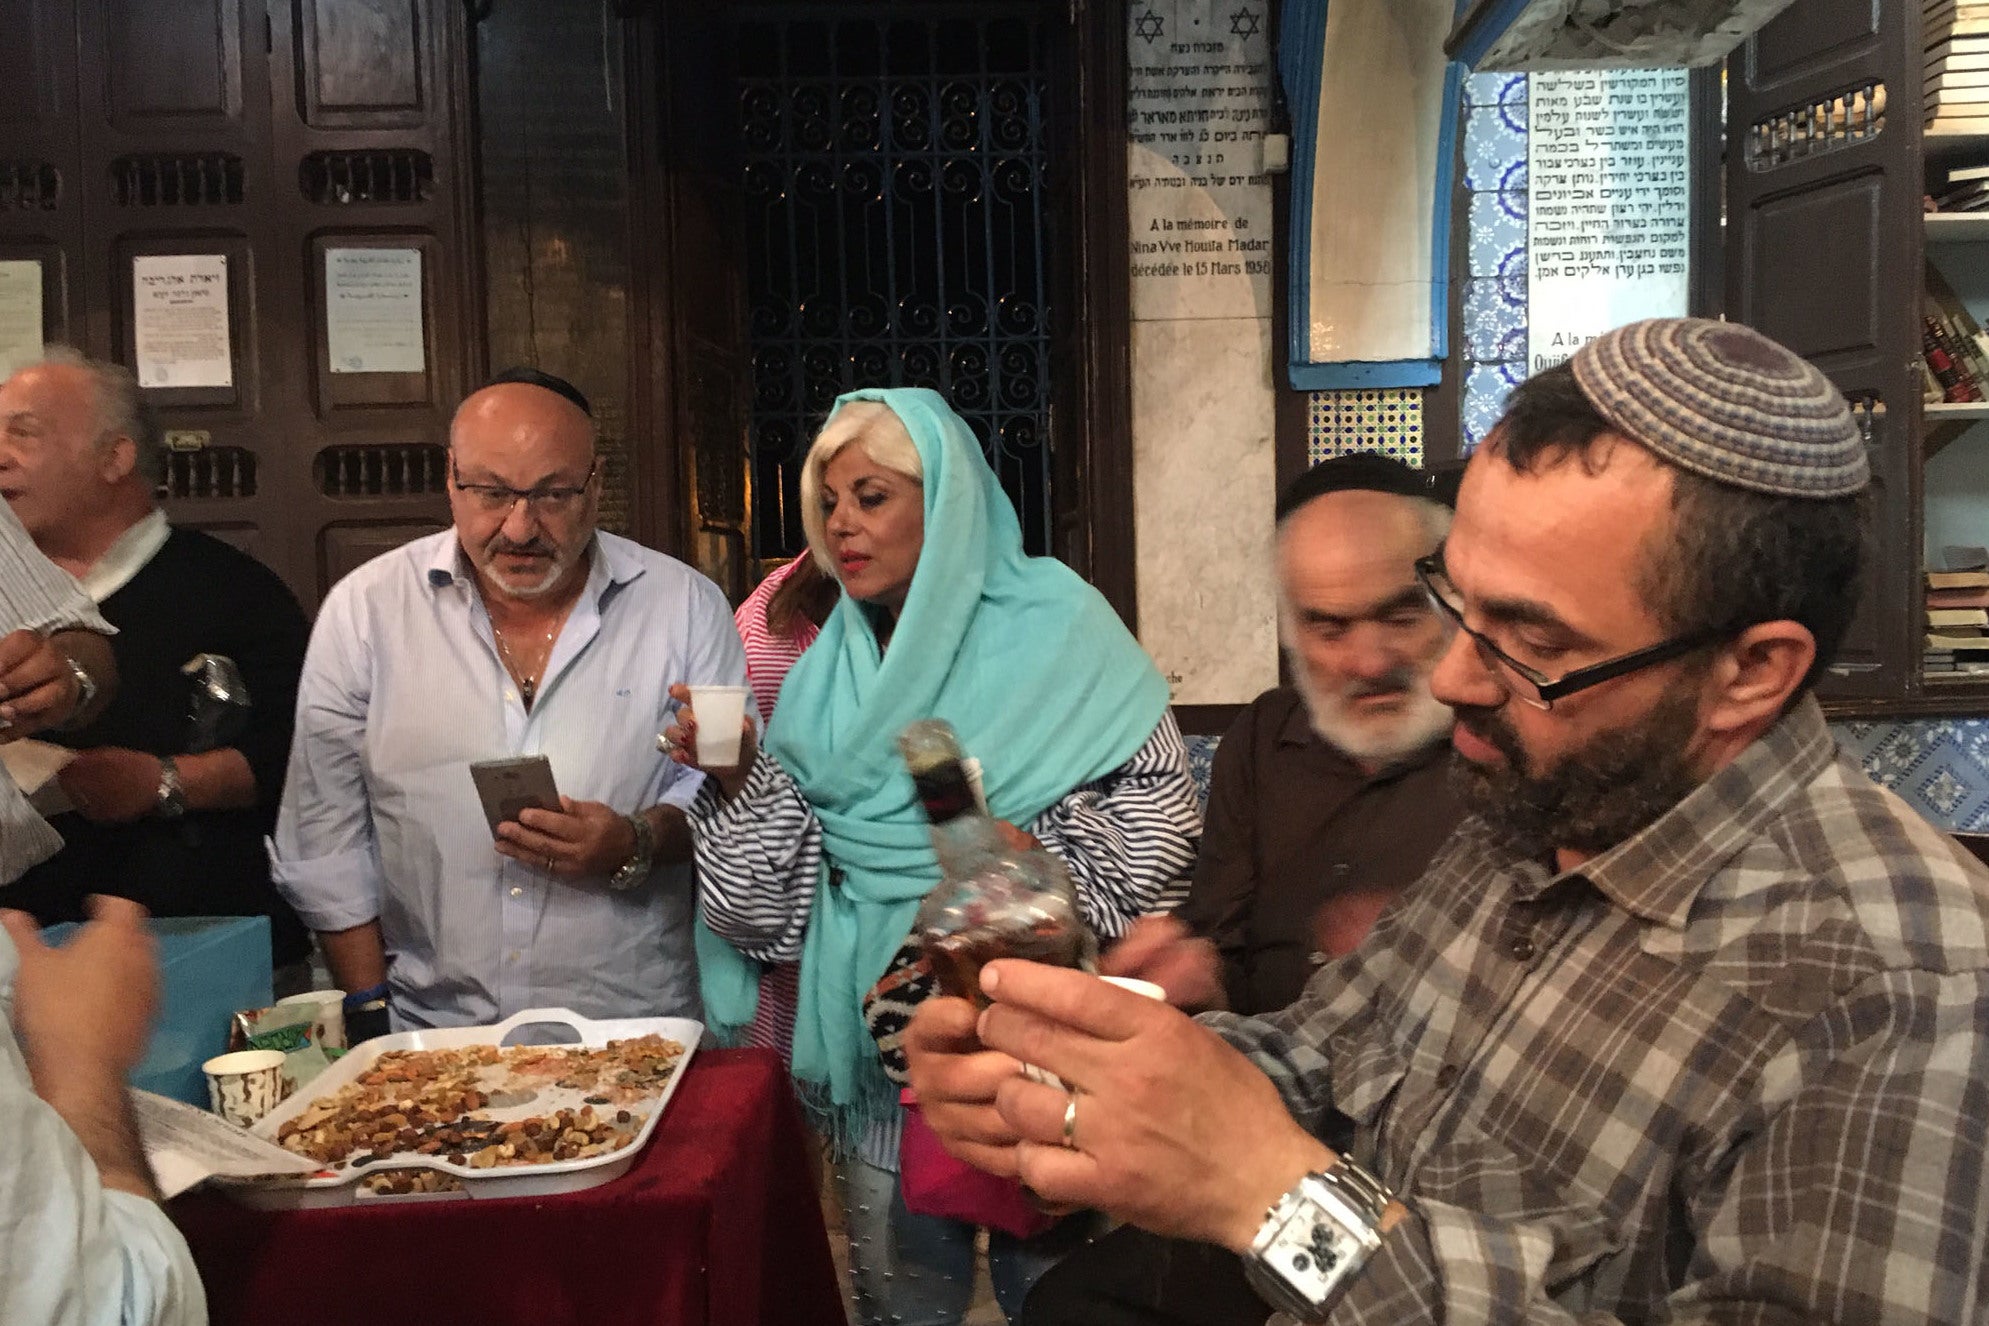 Eating and drinking are a big part of the Lag B’Omer celebrations